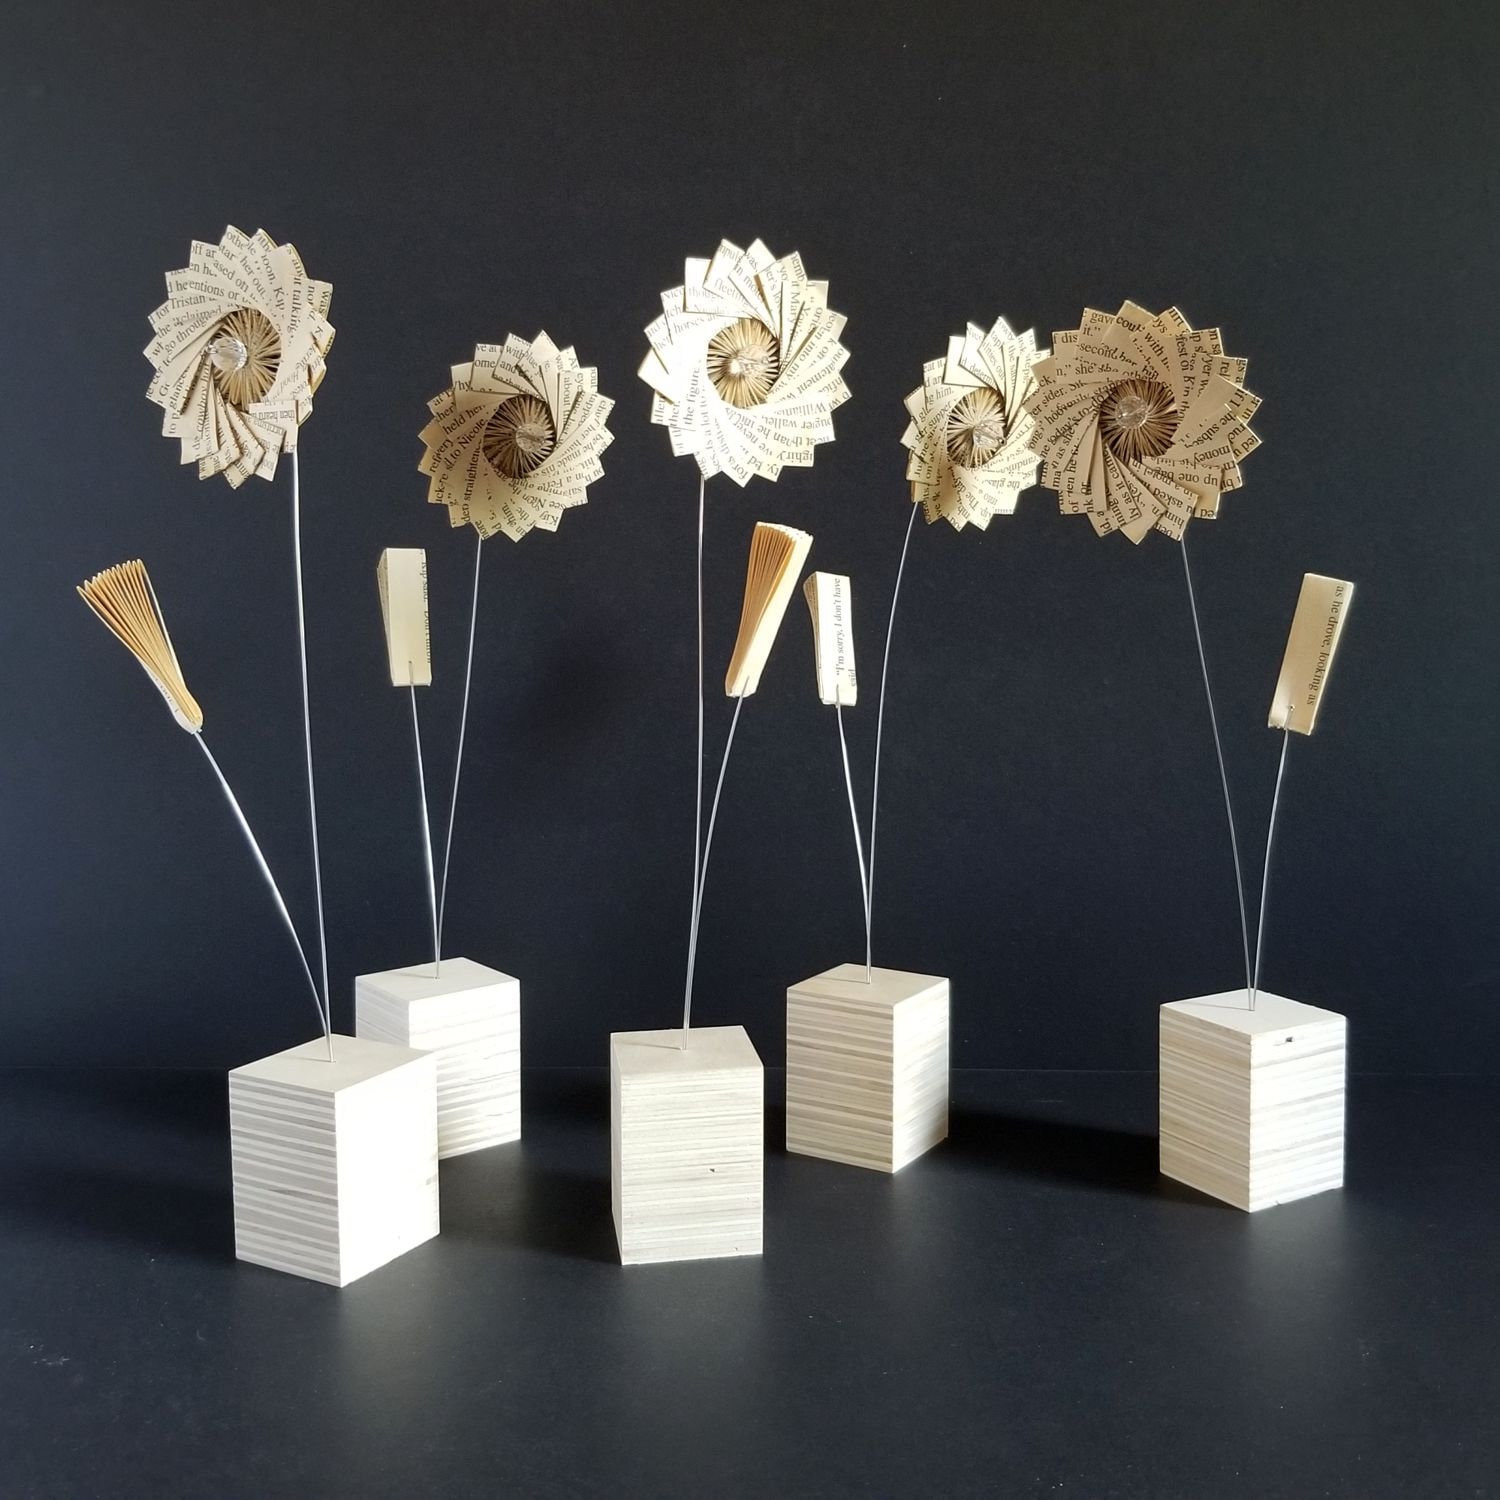 How to Make Paper Roses with Paper Bags - Left Brain Craft Brain